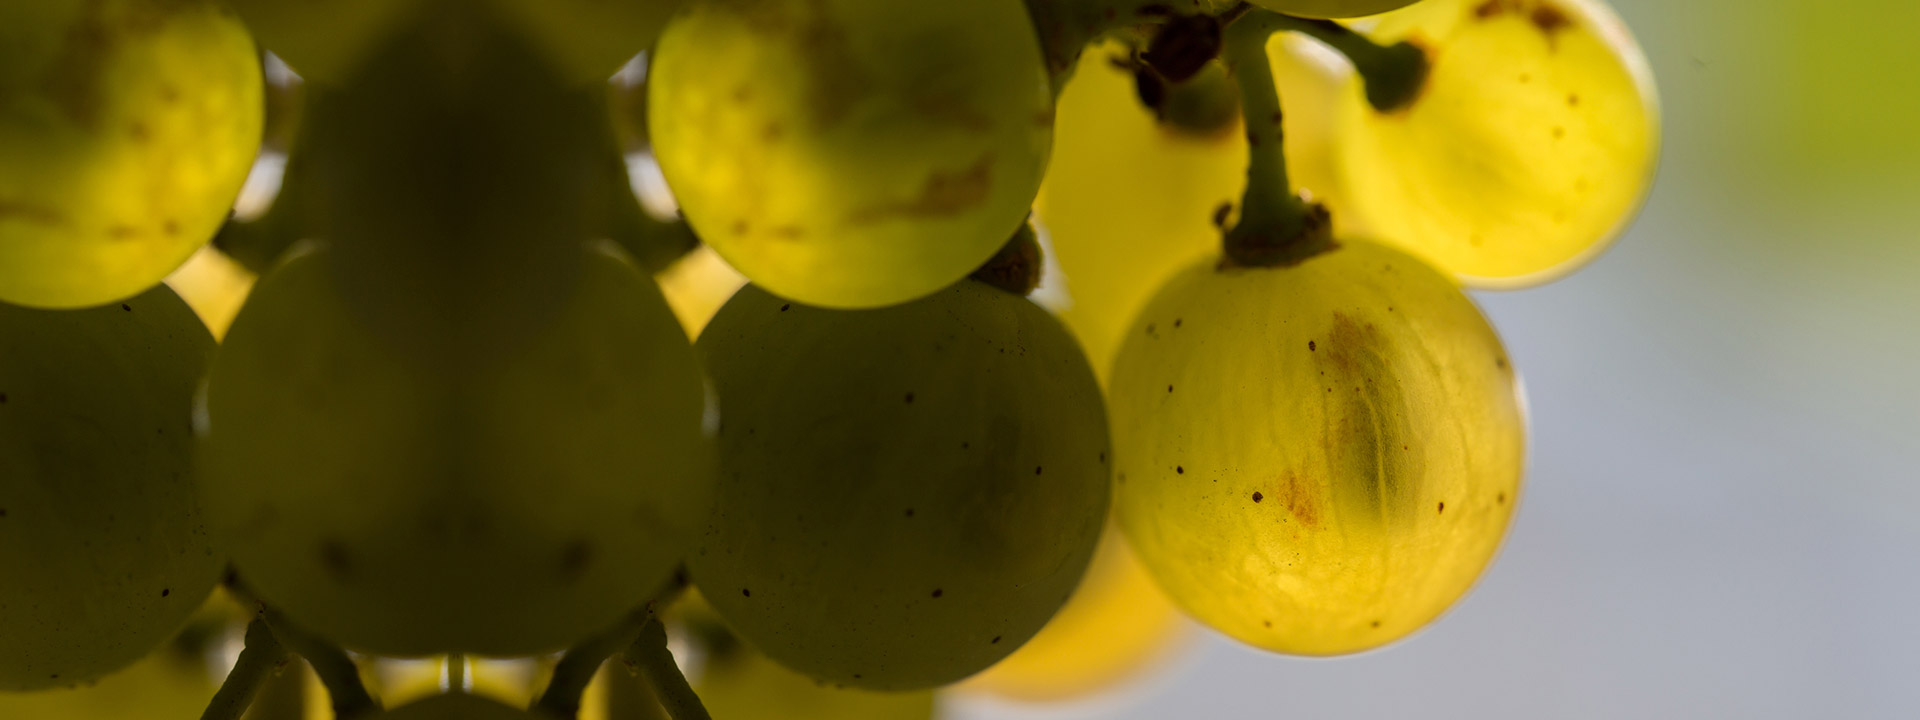 Up close view of young grapes with their seeds visible through the fruit.